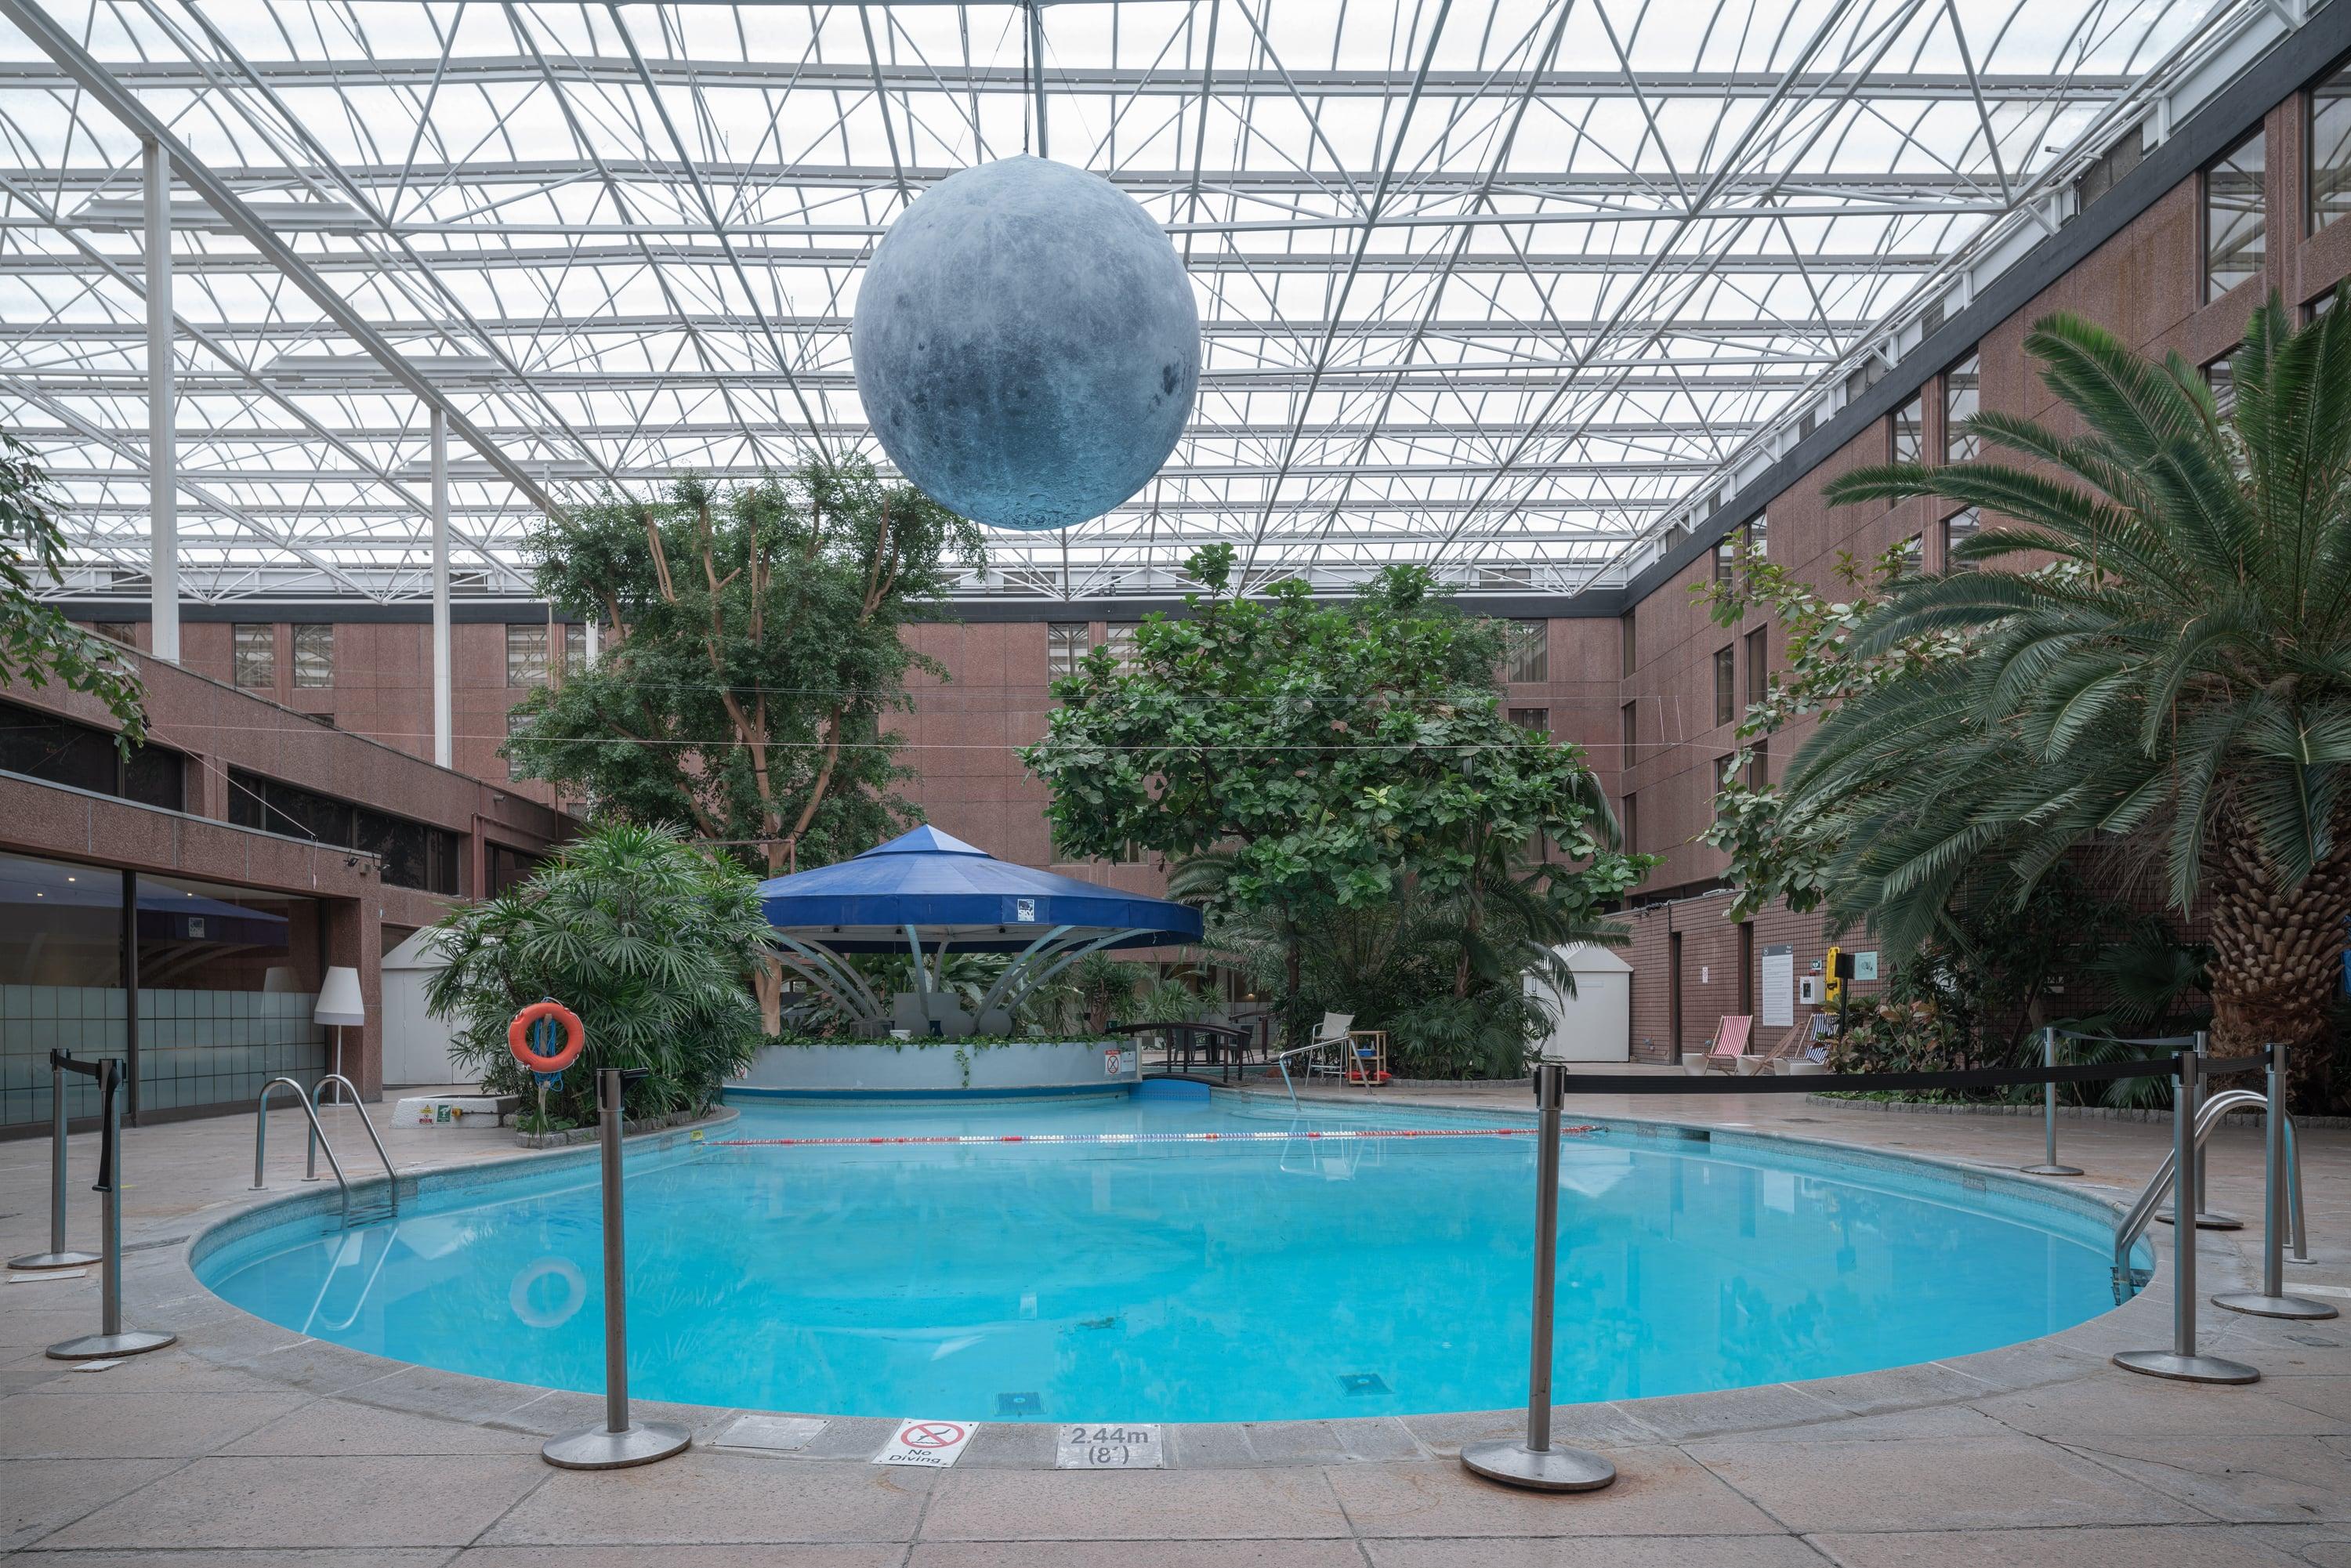 Anna Dobrovolskaya-Mints Color Photograph - Architectural Color Pool Photo: Hotel with Blue Moon-like Sphere, White Frame